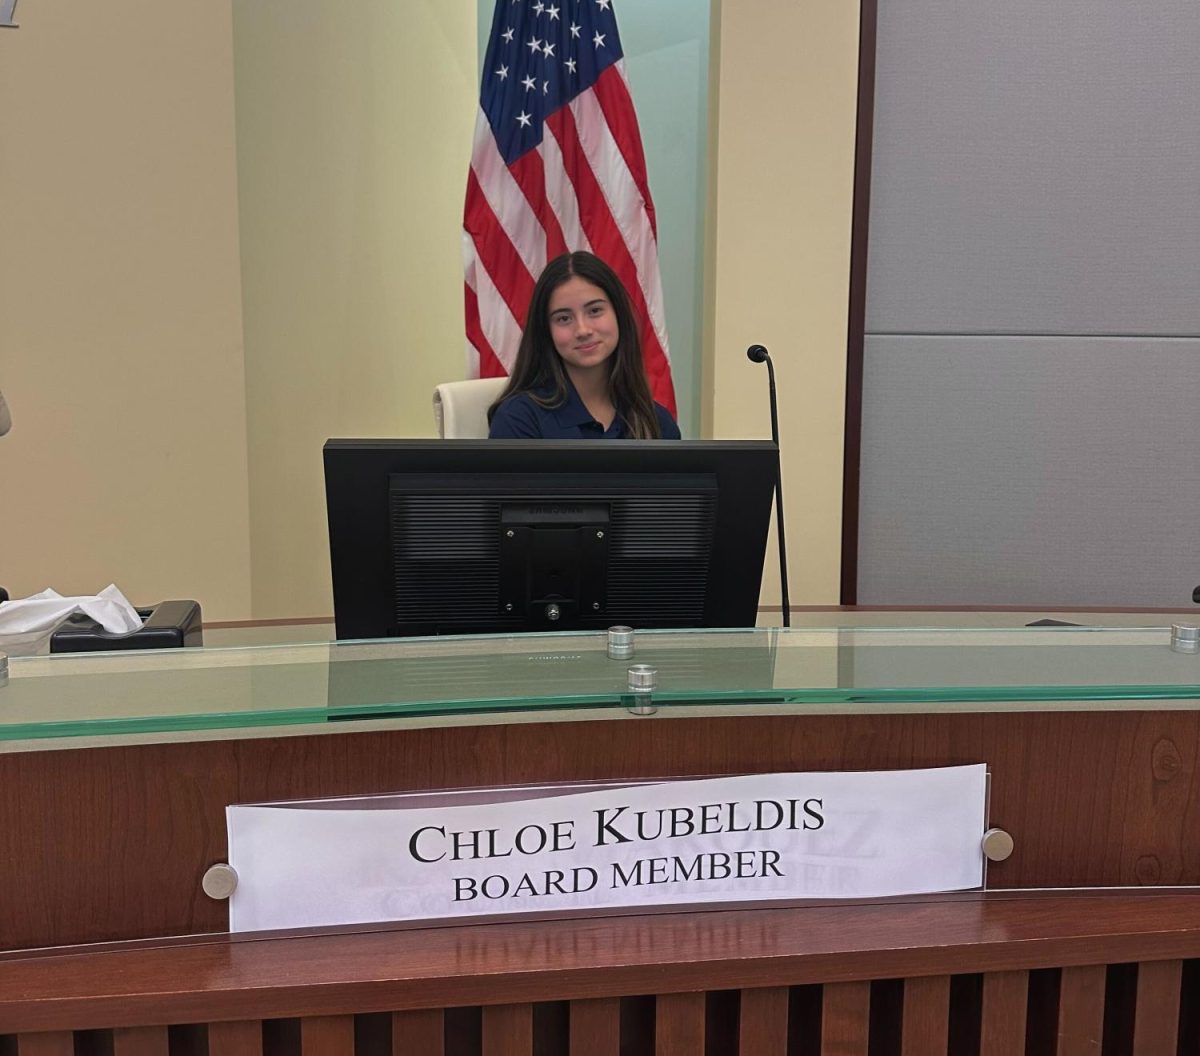 USB President Chloe Kubeldis is also Ayalas School Site Council (SSC) representative and a member of Chino Hills Teen Advisory Board (TAB). As voicing school issues and concerns becomes a growing topic among students, Kubeldis signifies the importance of shaping school culture. 